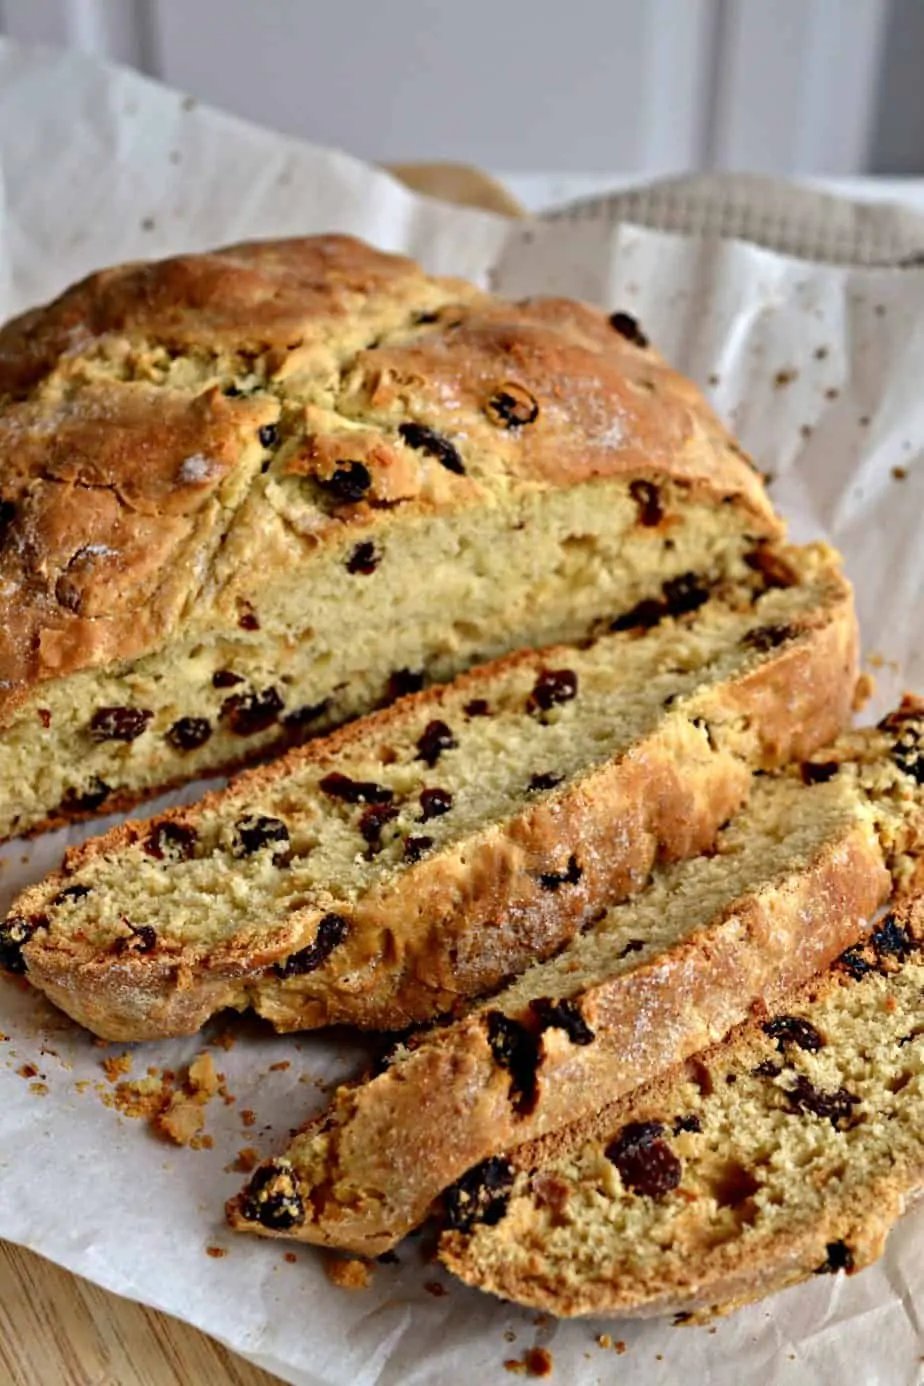 Classic Irish soda bread is a slightly sweet, delicious break with raisins and topped with sanding sugar